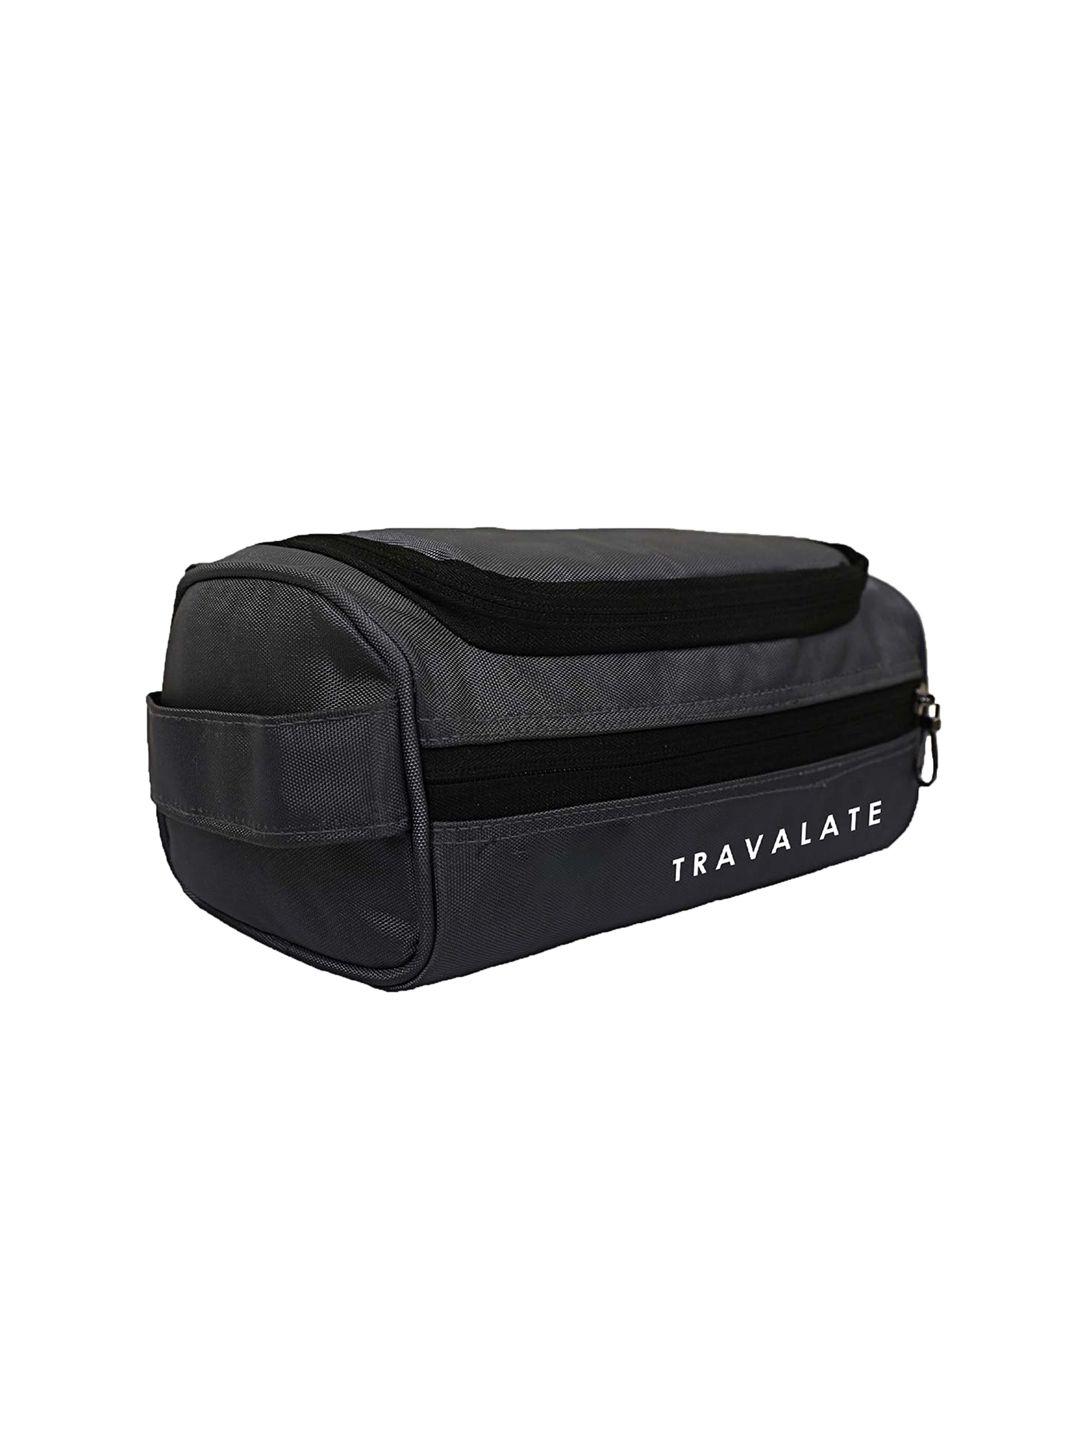 travalate grey solid travel pouch